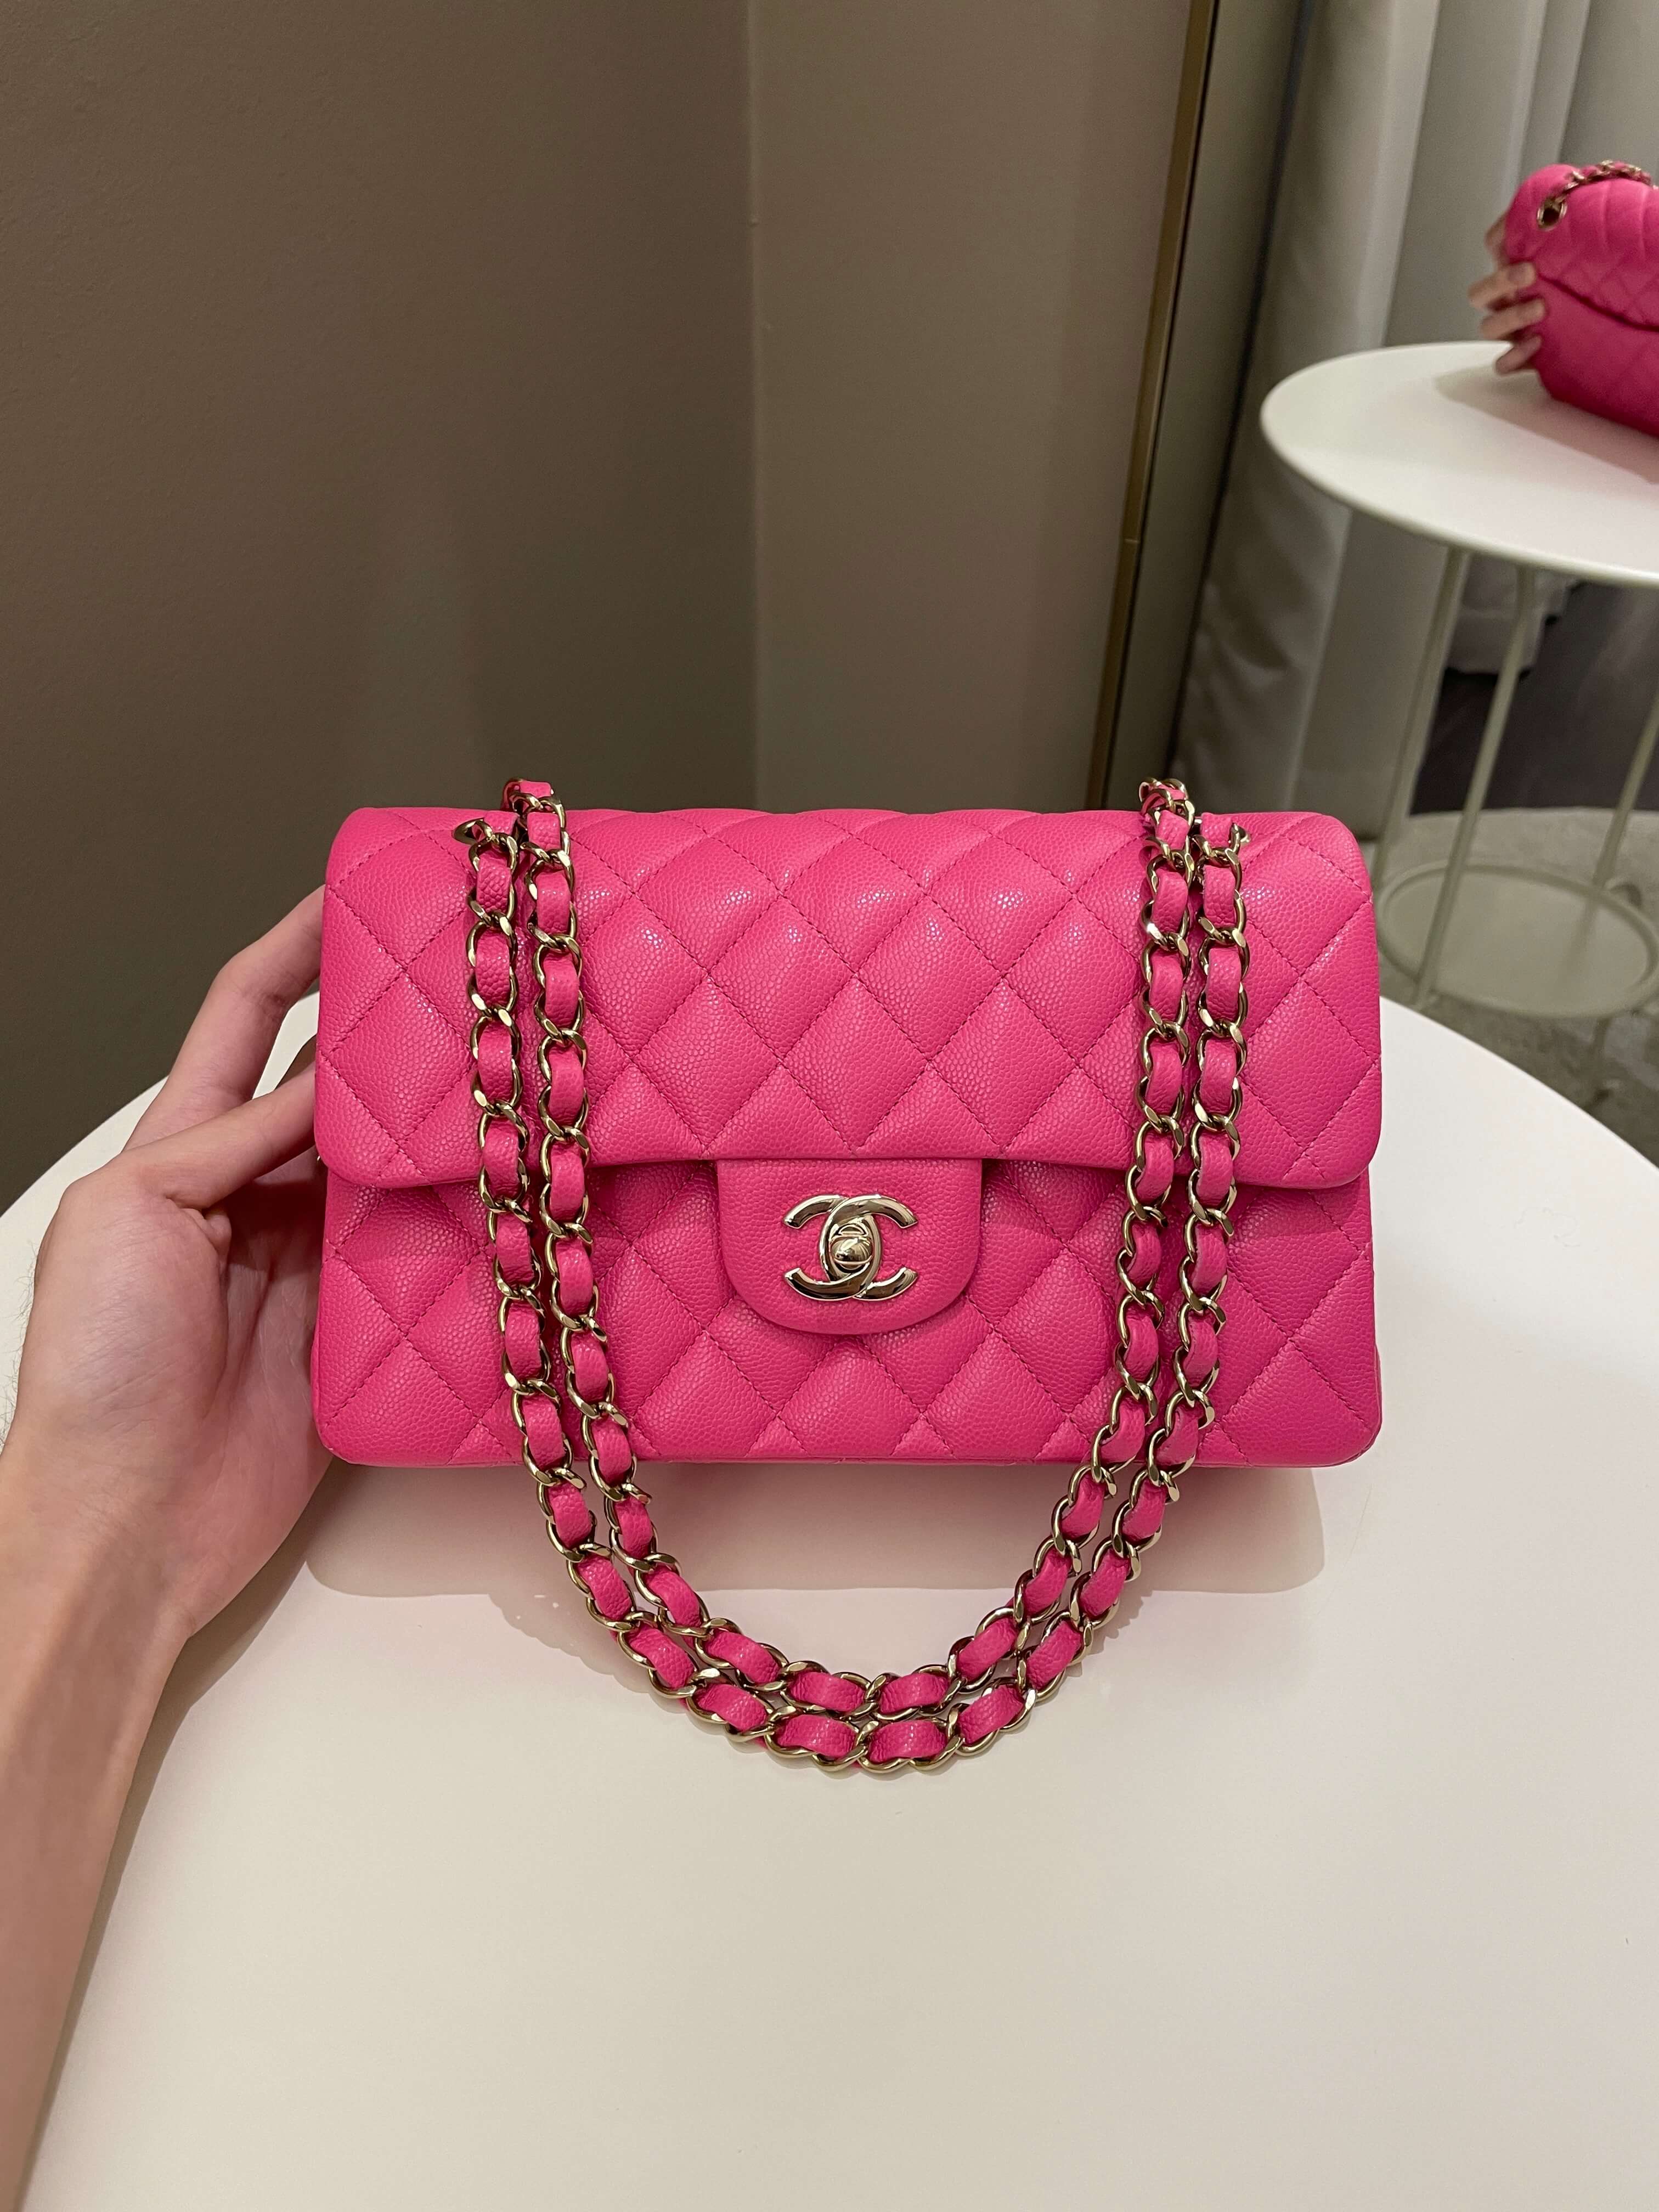 Chanel Hot Pink Caviar Double Flap Bag